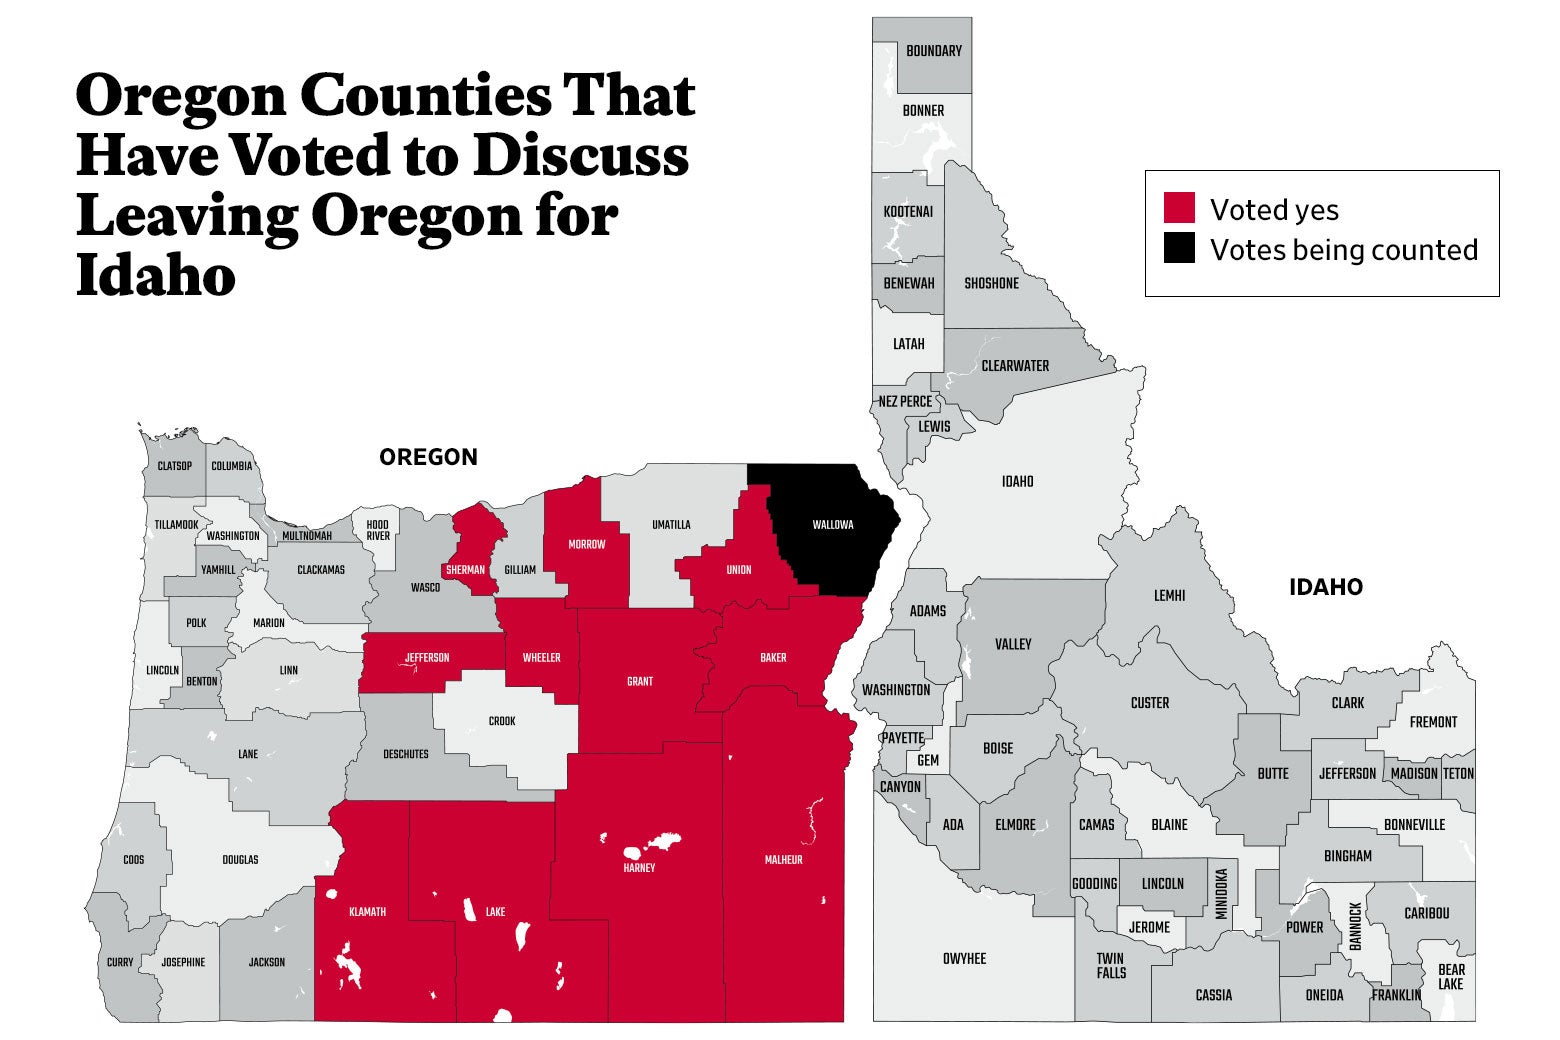 A chart titled "Oregon Counties That Have Voted to Discuss Leaving Oregon for Idaho." More than 10 counties have voted yes.